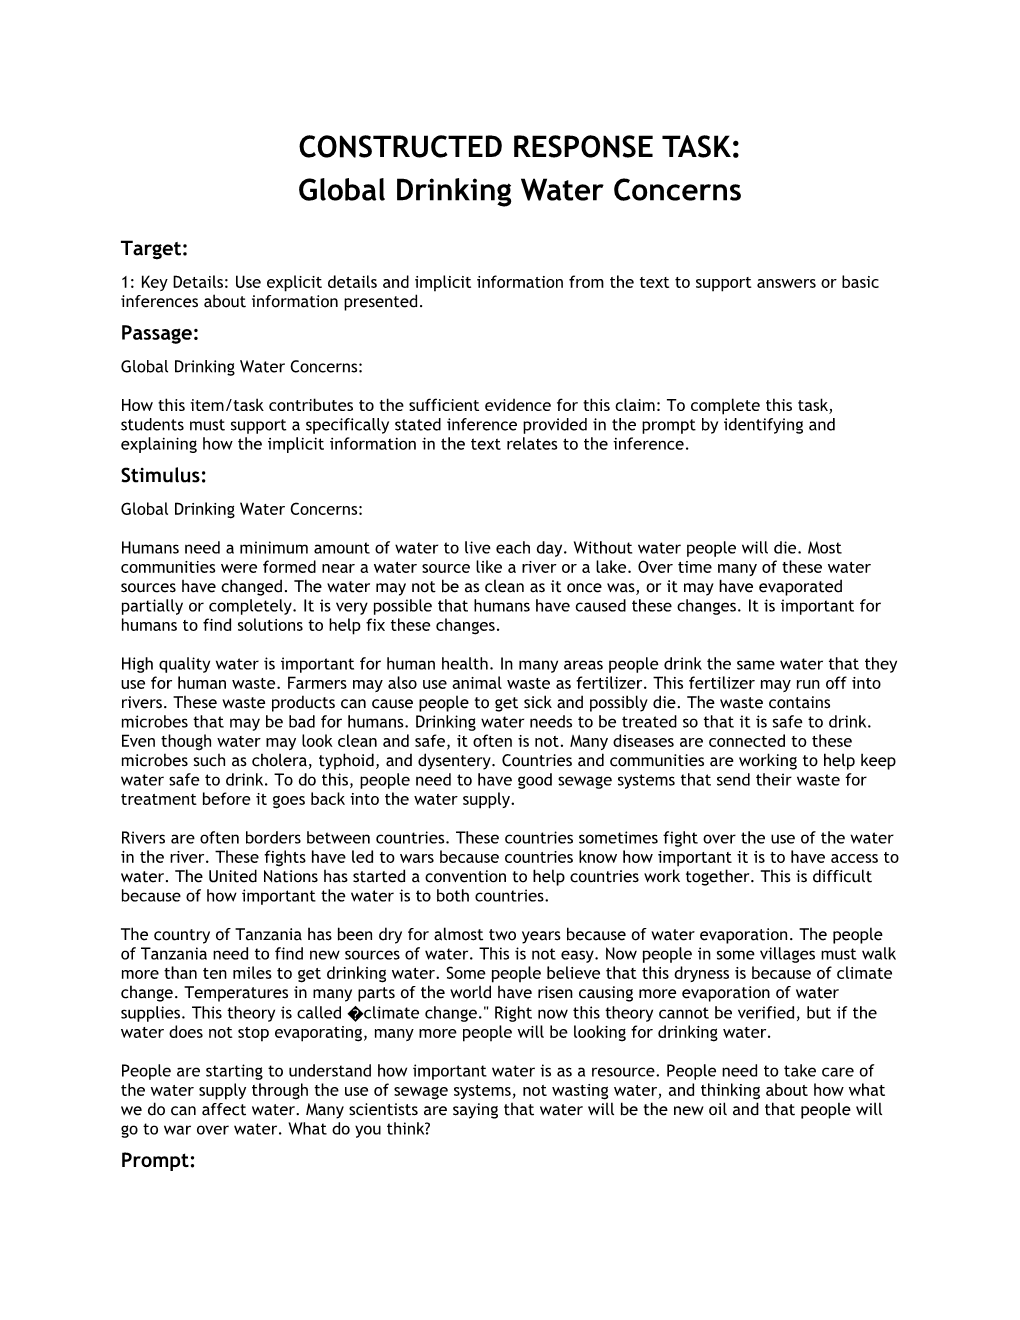 Global Drinking Water Concerns